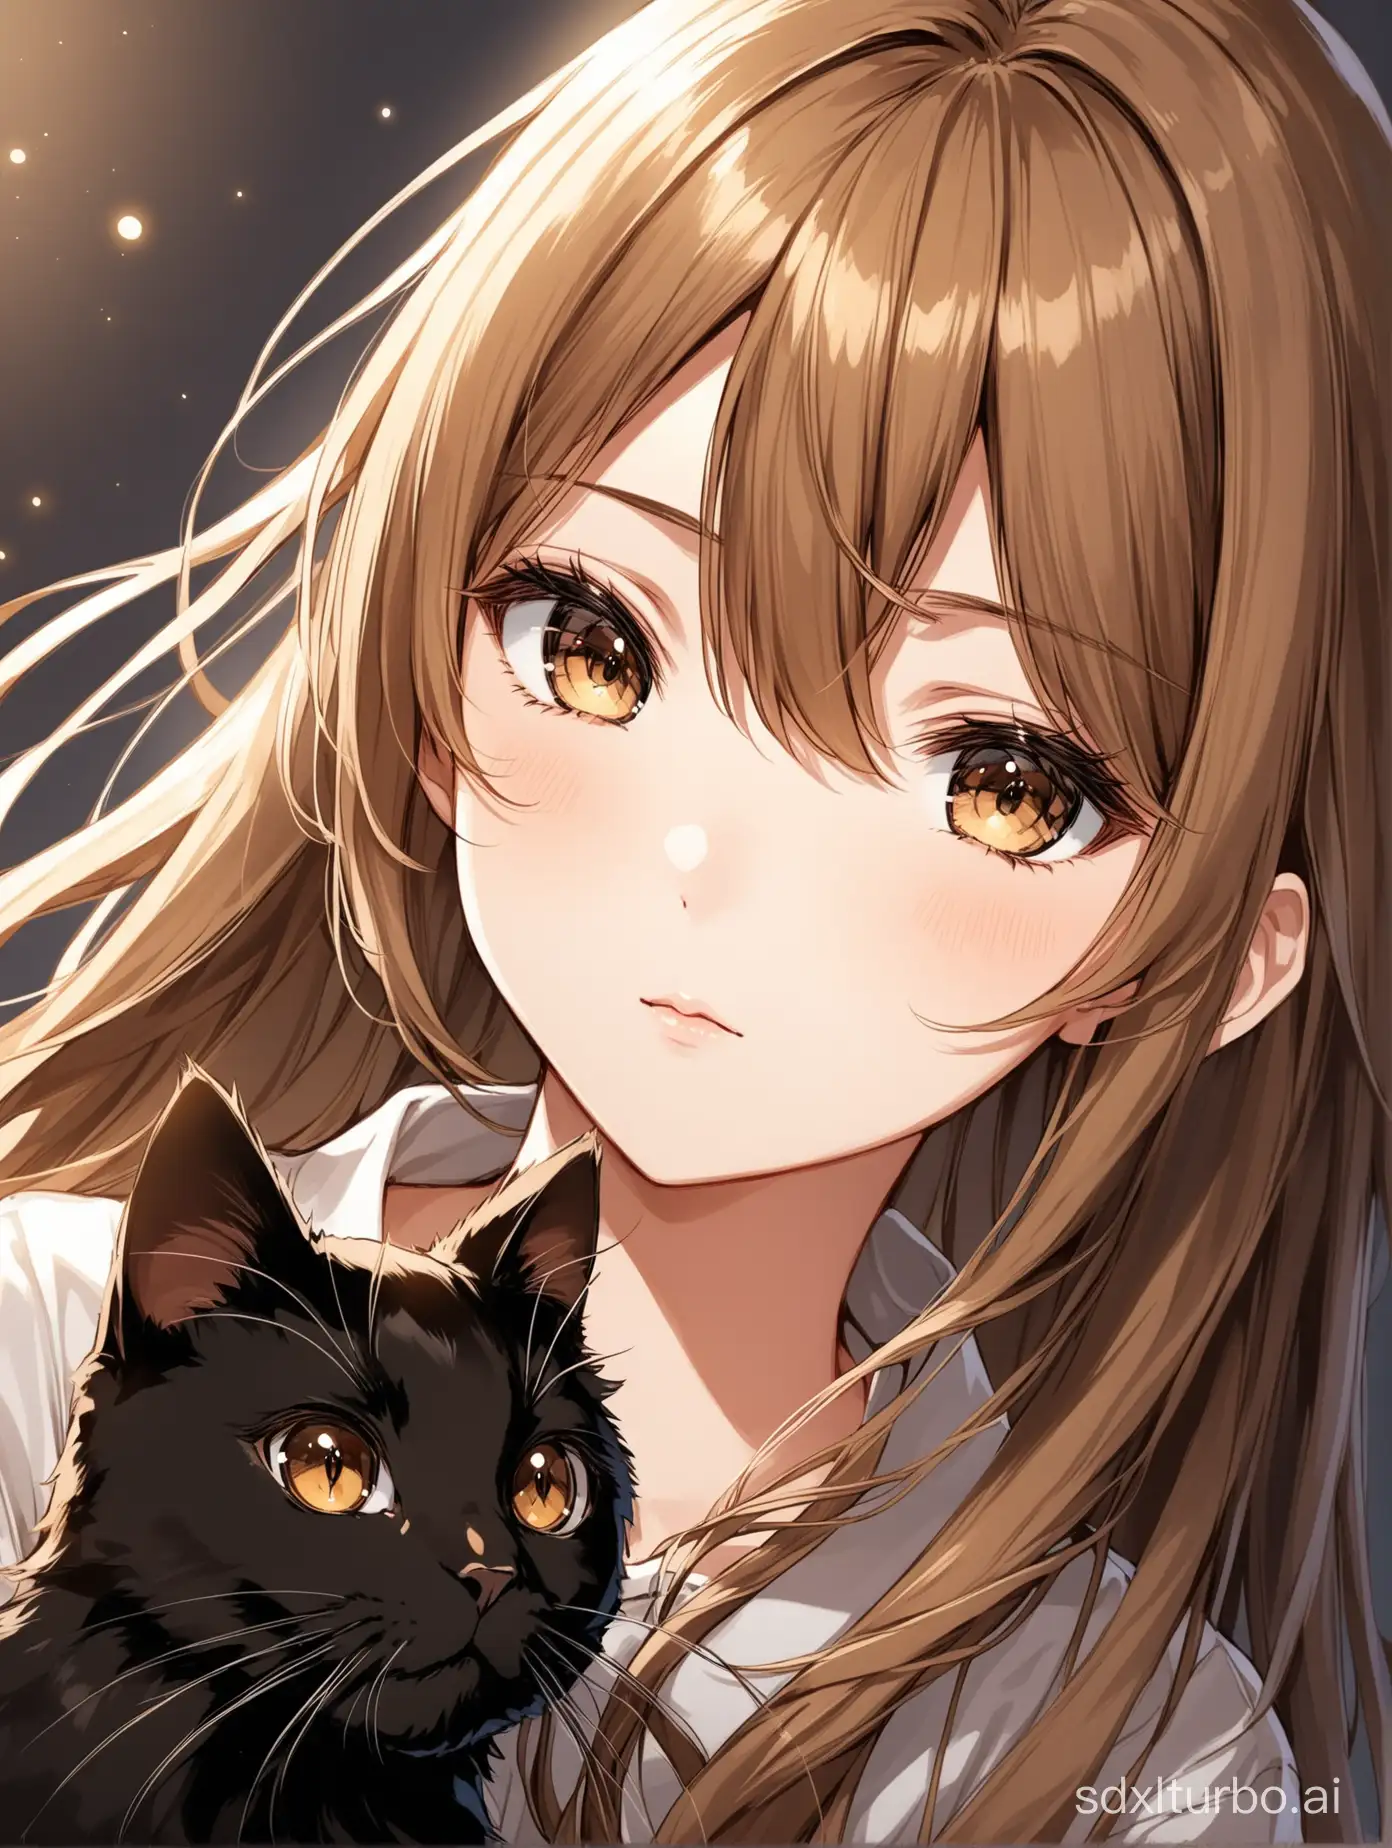 Anime girl with dark blond long hair, brown eyes and with black cat